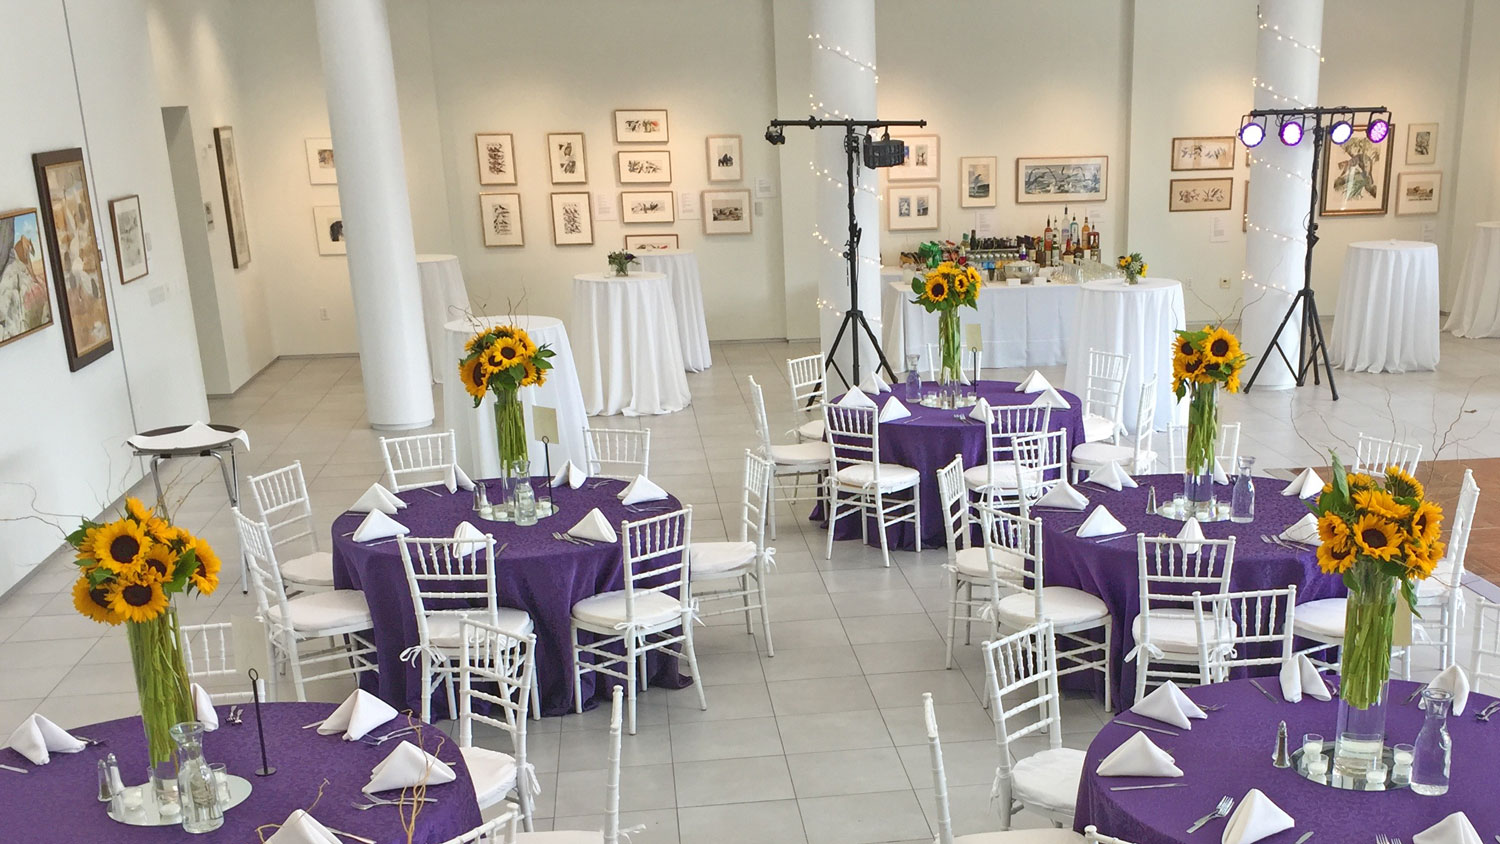 The university gallery space set up with purple table-clothed tables with sunflower bouqets.